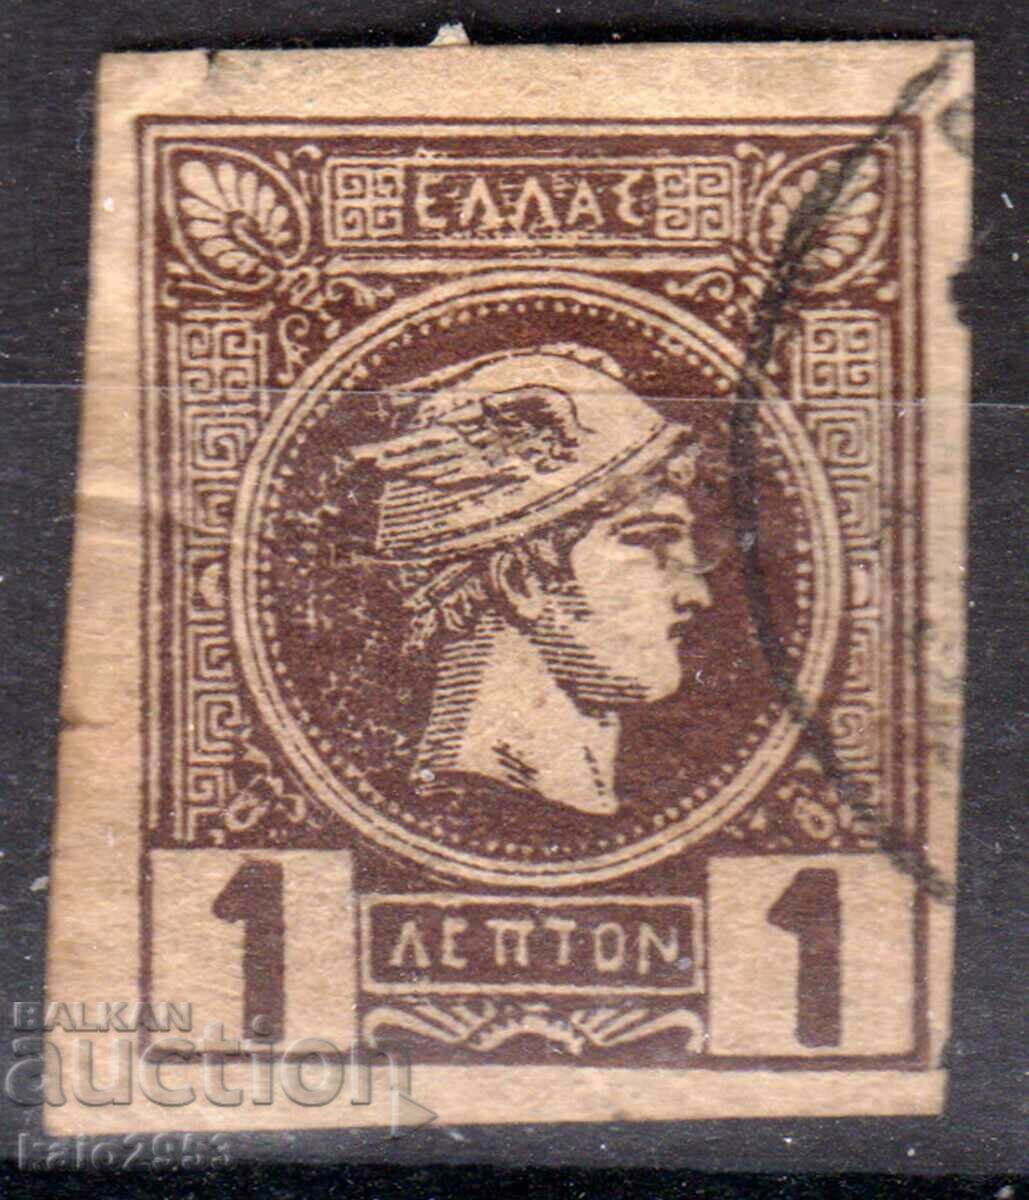 Grecia-1898-Small Hermes-neperforated, stamp